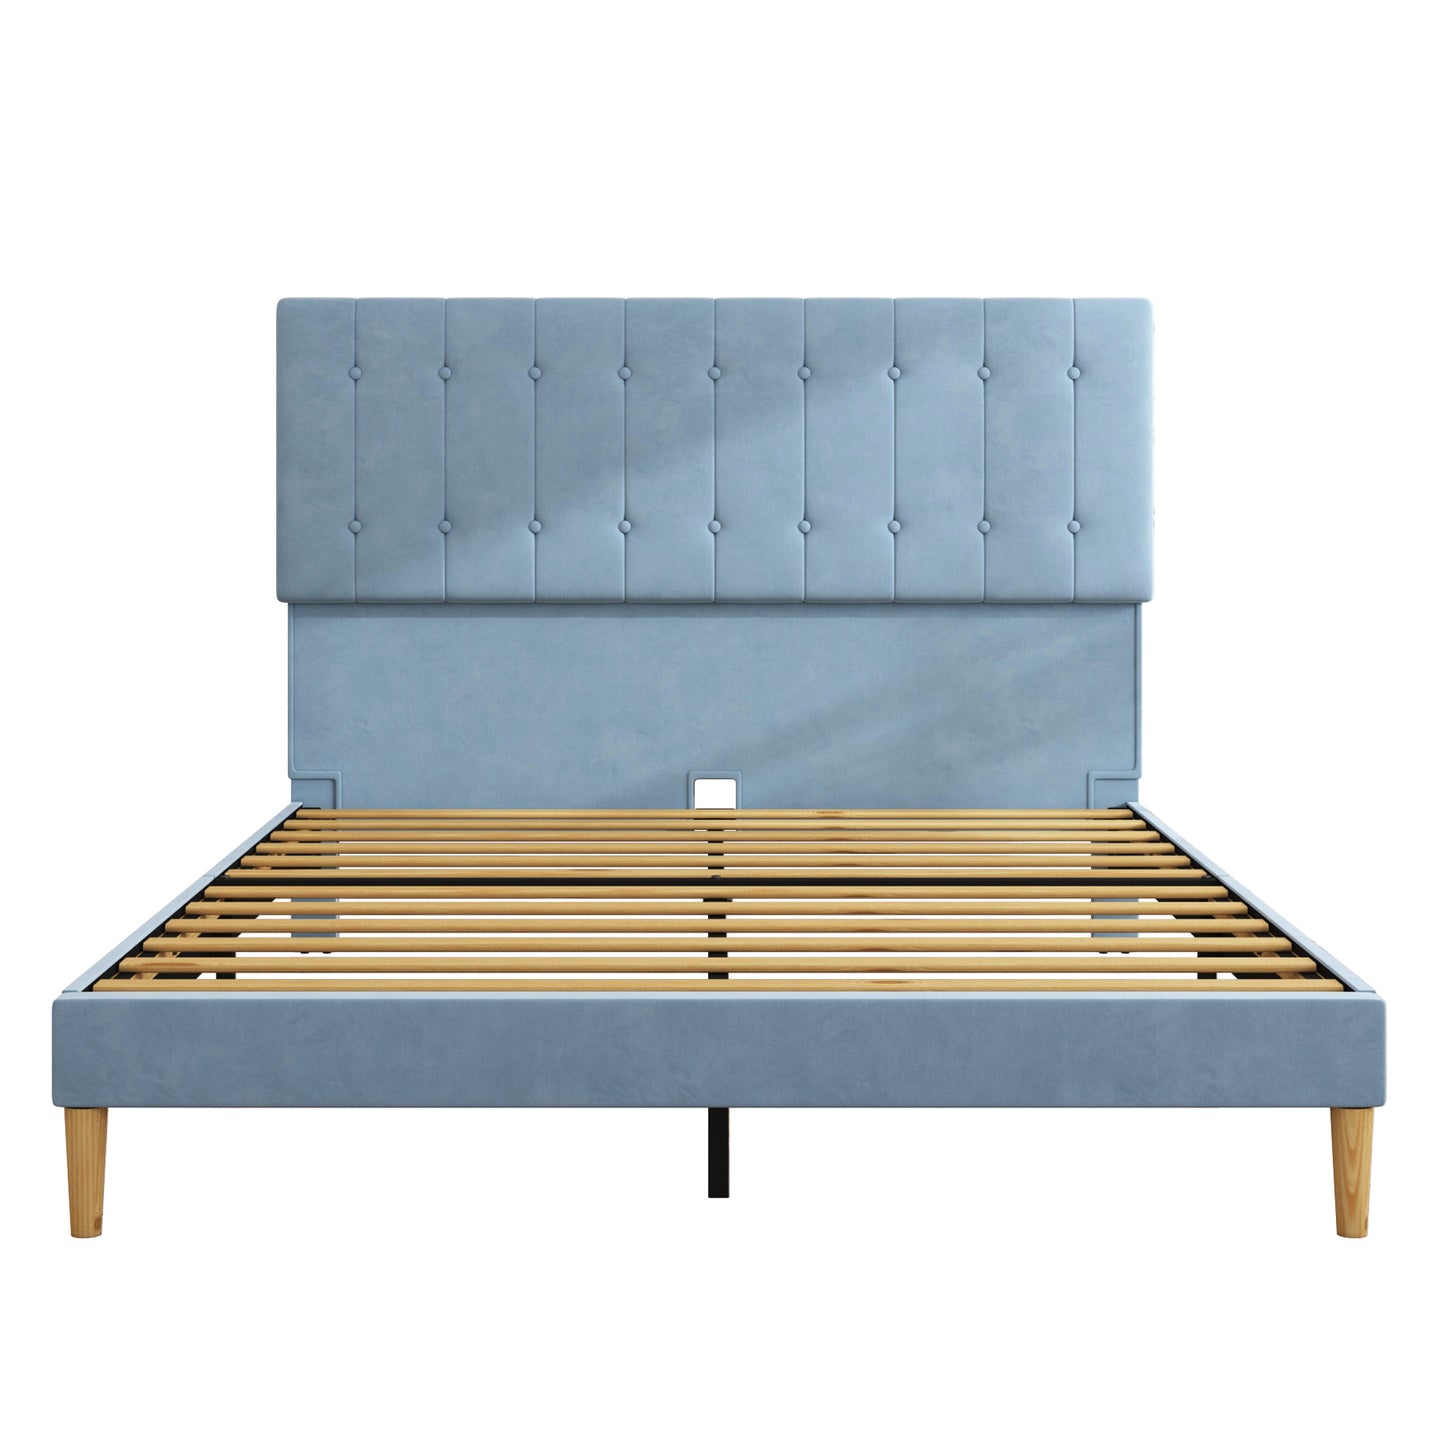 SYNGAR Blue Fabric Upholstered Platform Bed Frame Queen Size with Button Tufted Headboard, Mattress Foundation Metal Frame with Strong Wood Slat Support, No Box Spring Needed